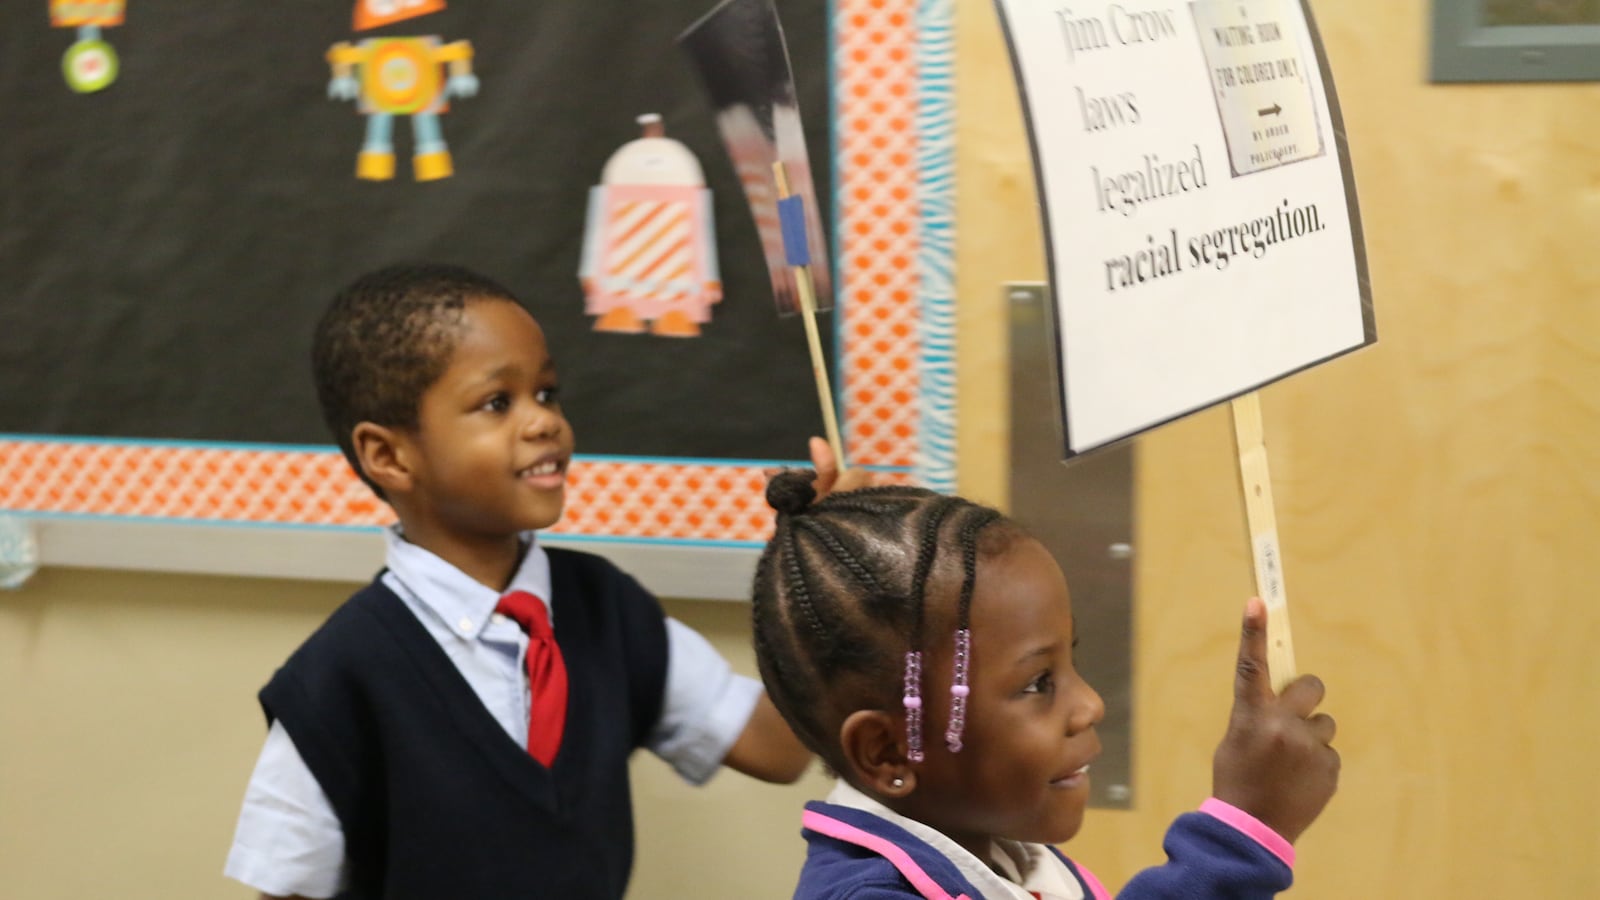 Kindergartners at New American Academy Charter School in Canarsie learned about the civil rights movement and Martin Luther King Jr. by staging a peaceful march in the school hallway.